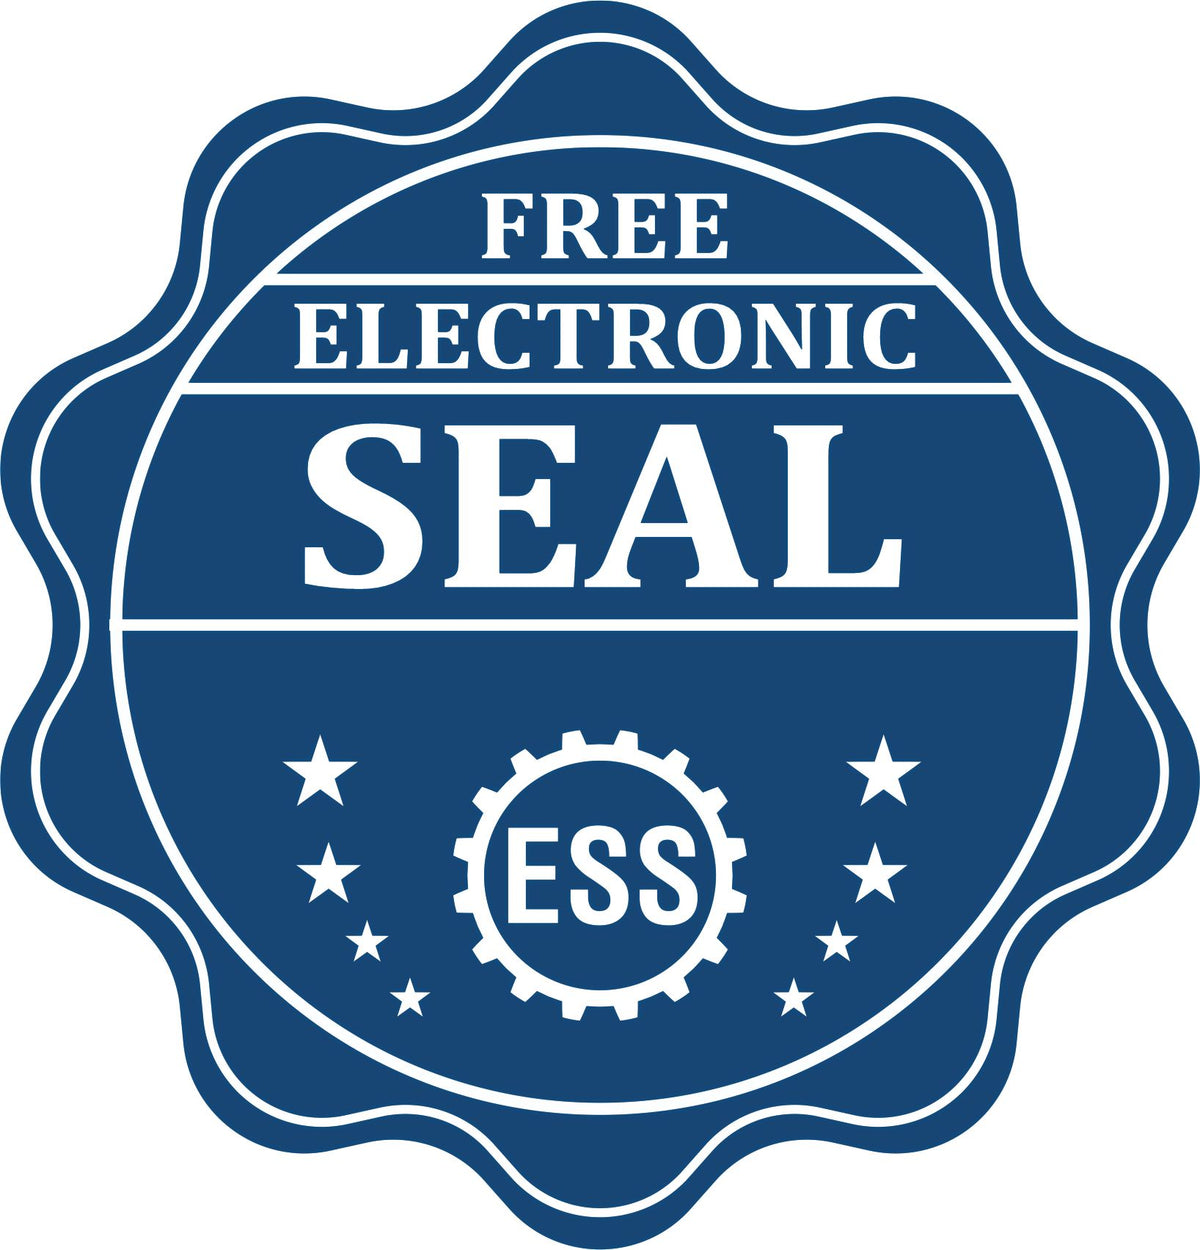 A badge showing a free electronic seal for the Hybrid Kansas Architect Seal with stars and the ESS gear on the emblem.